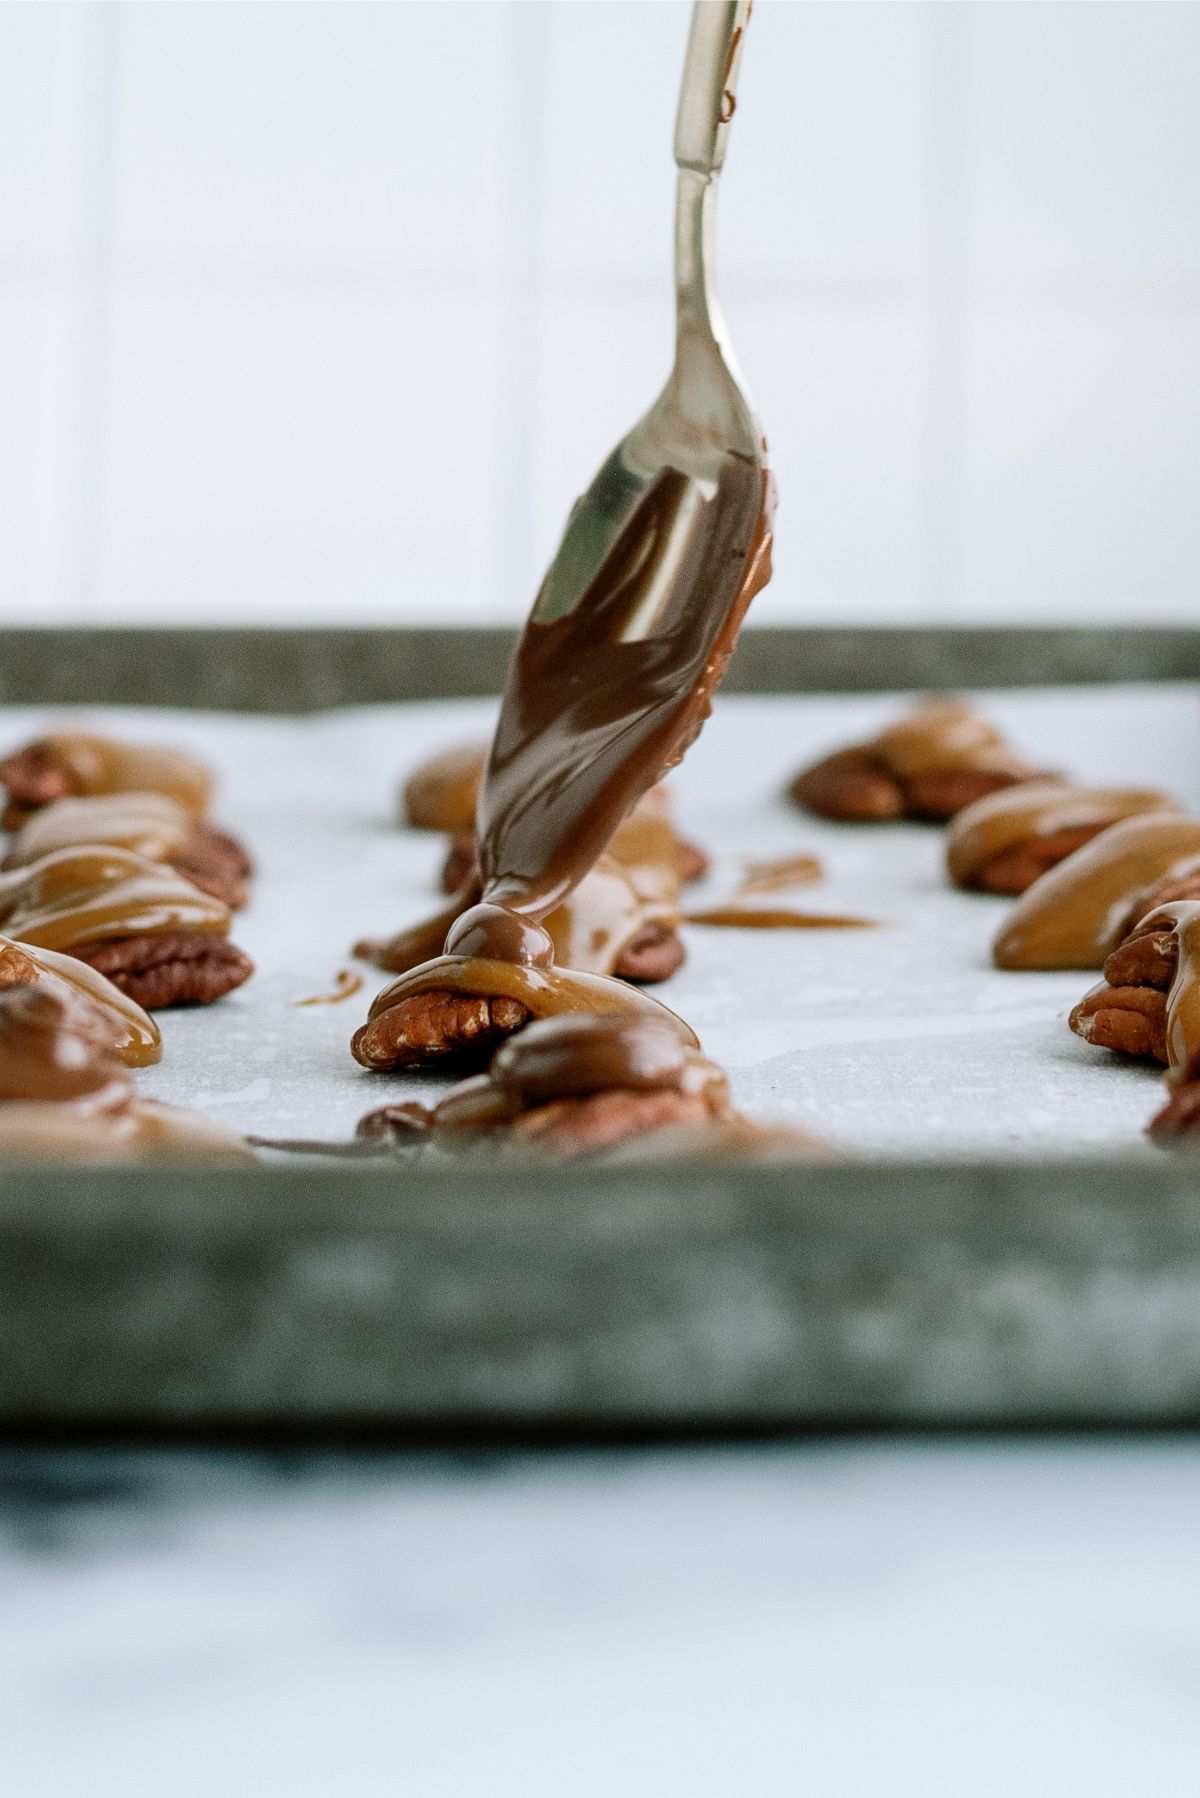 Spooning melted chocolate on top of the caramel pecans